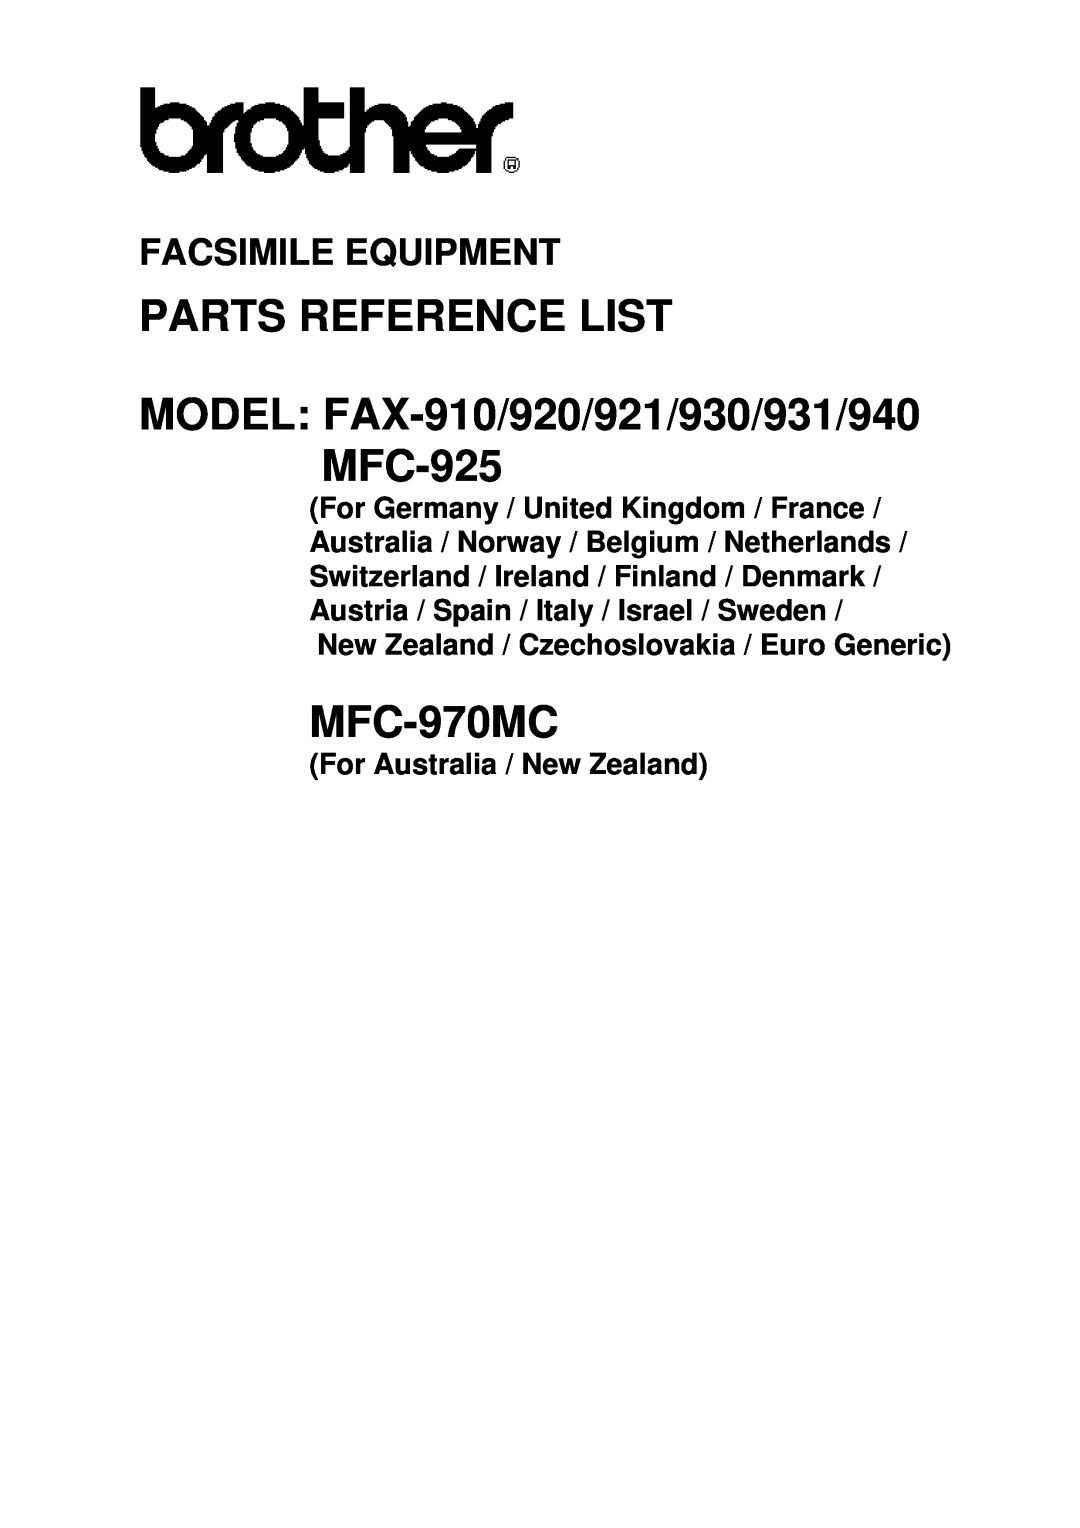 Brother manual PARTS REFERENCE LIST MODEL FAX-910/920/921/930/931/940 MFC-925, MFC-970MC, Facsimile Equipment 